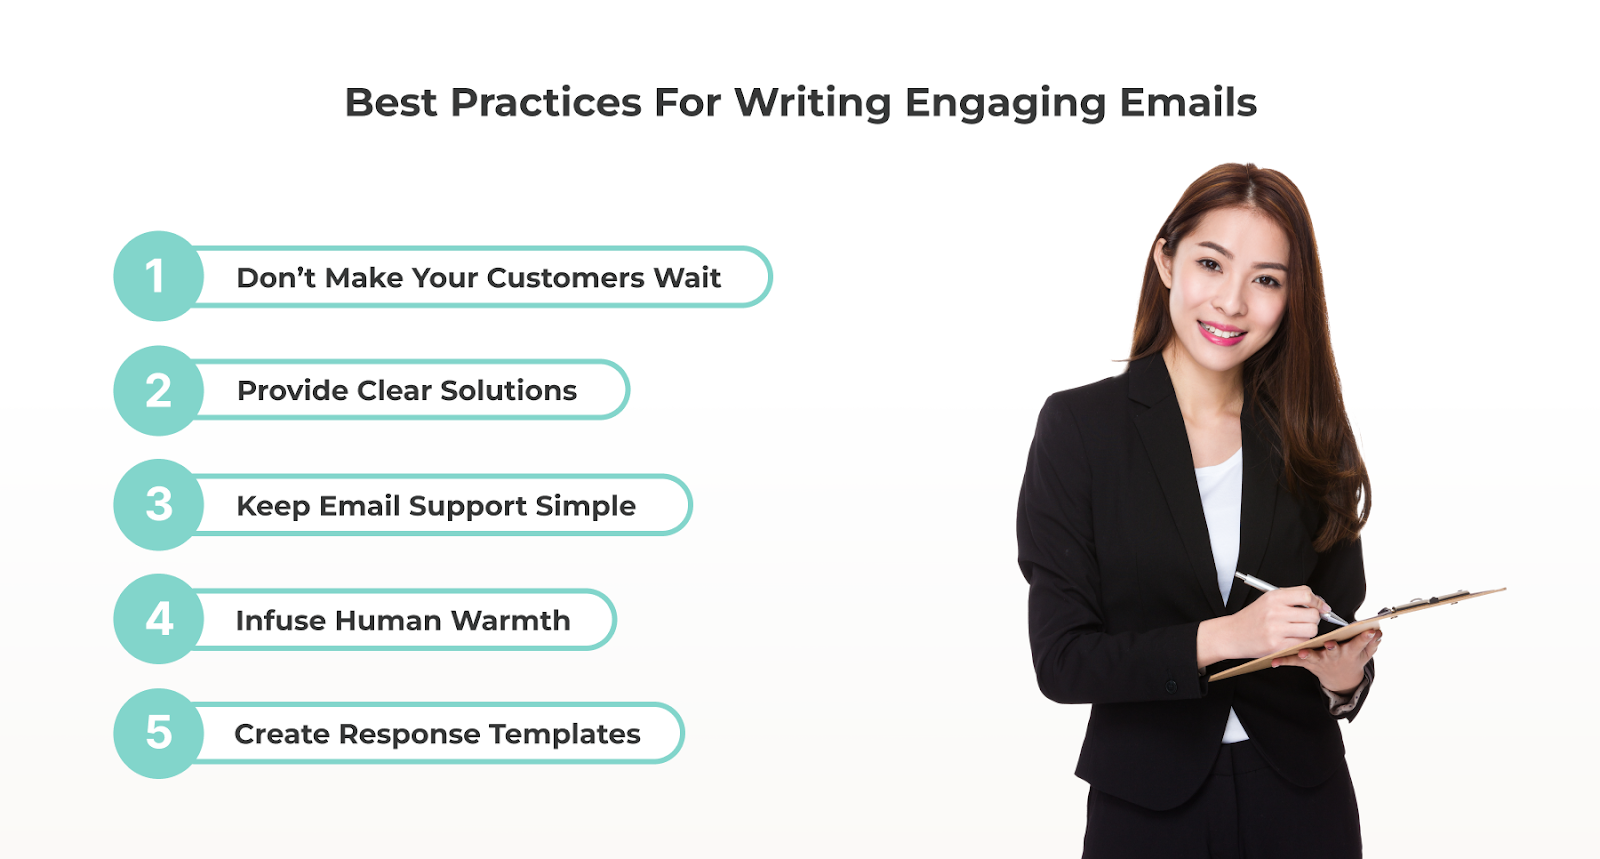 Best Practices for Writing Engaging Customer Service Emails